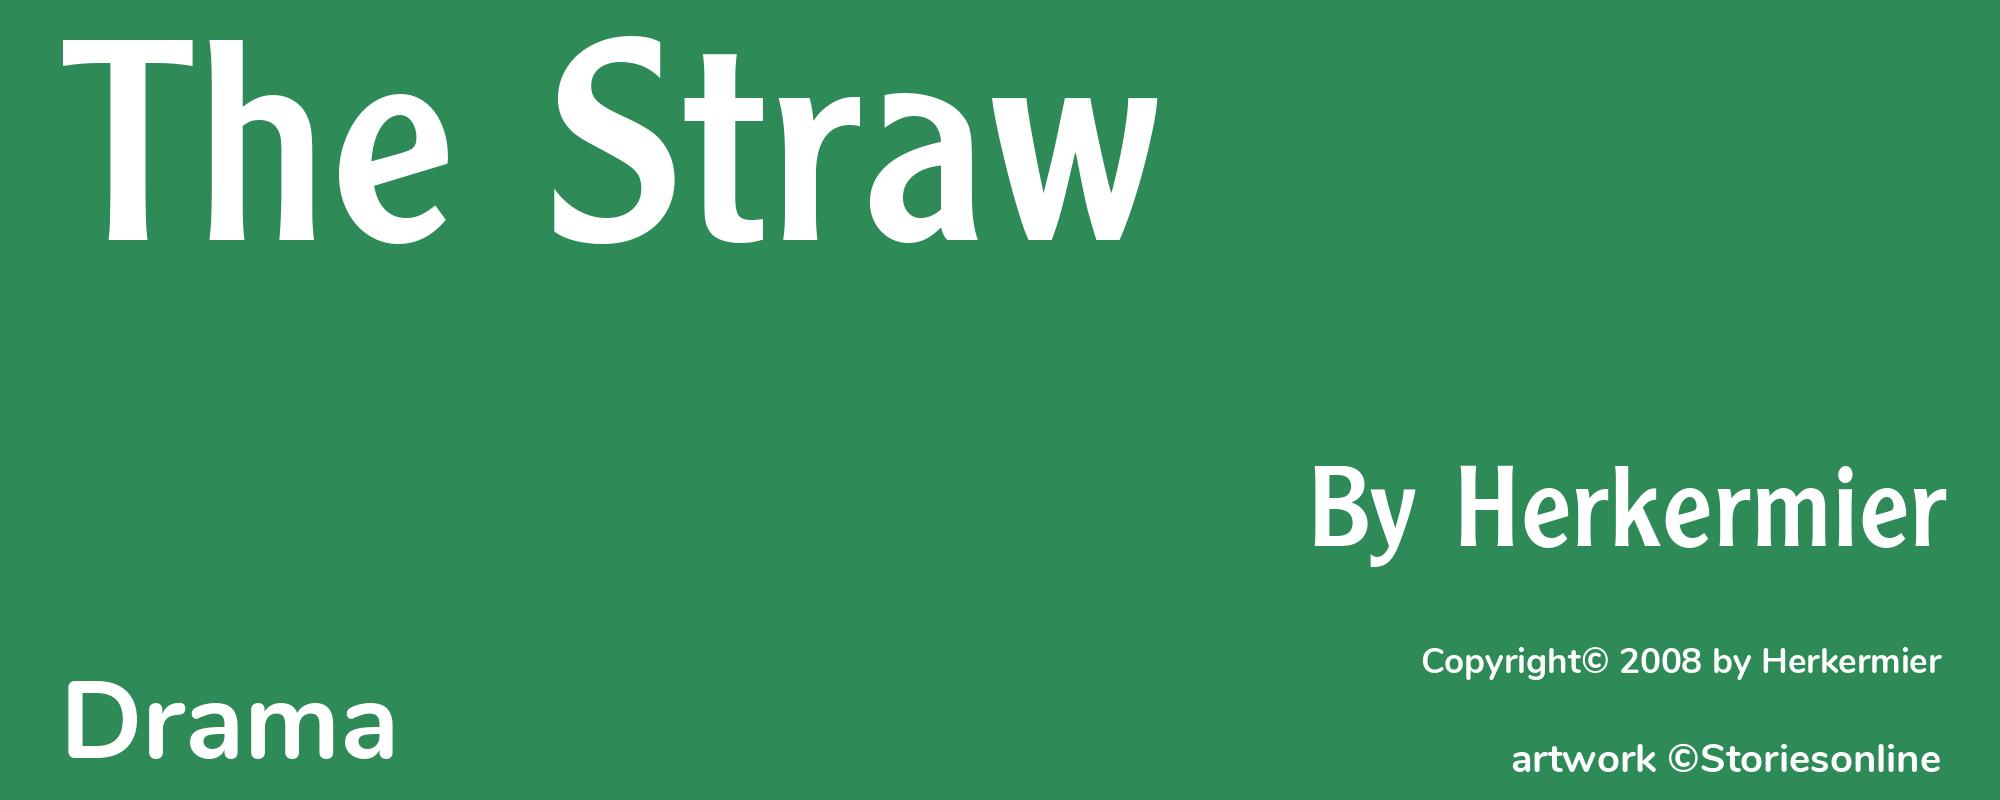 The Straw - Cover